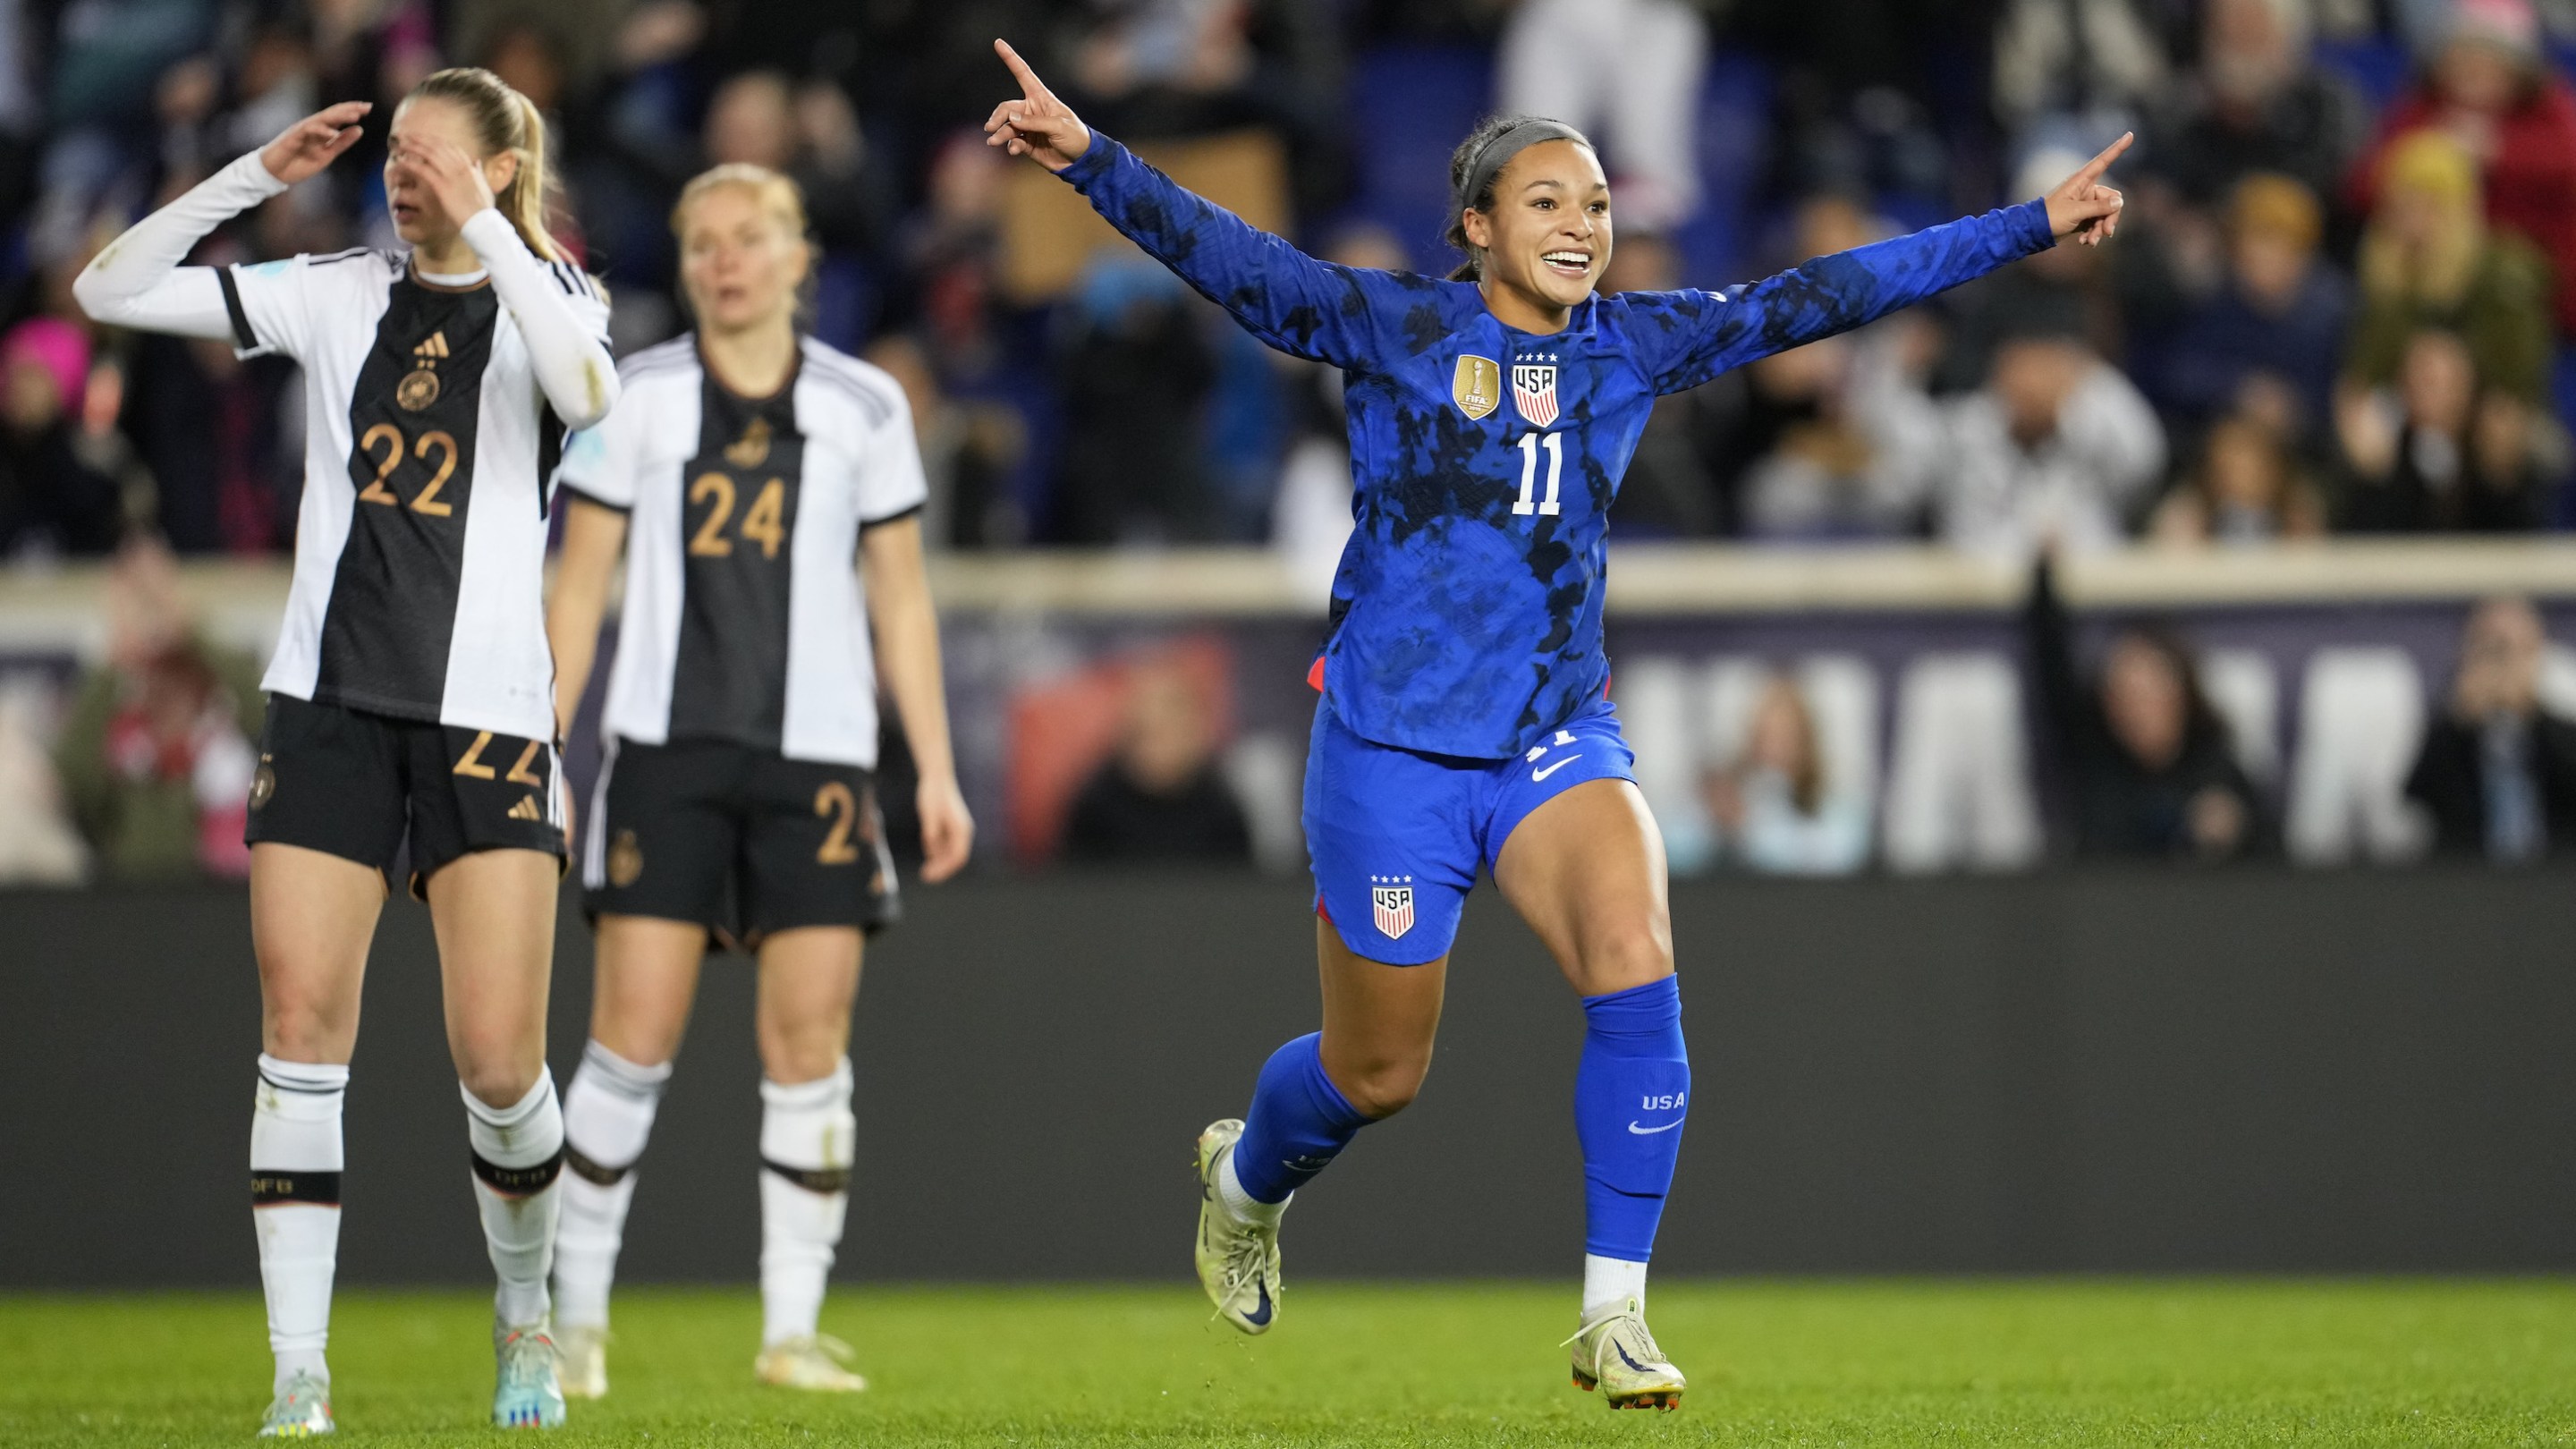 Sophia Smith #11 of the United States scores a goal and celebrates during a game between Germany and USWNT at Red Bull Arena on November 13, 2022 in Harrison, New Jersey.